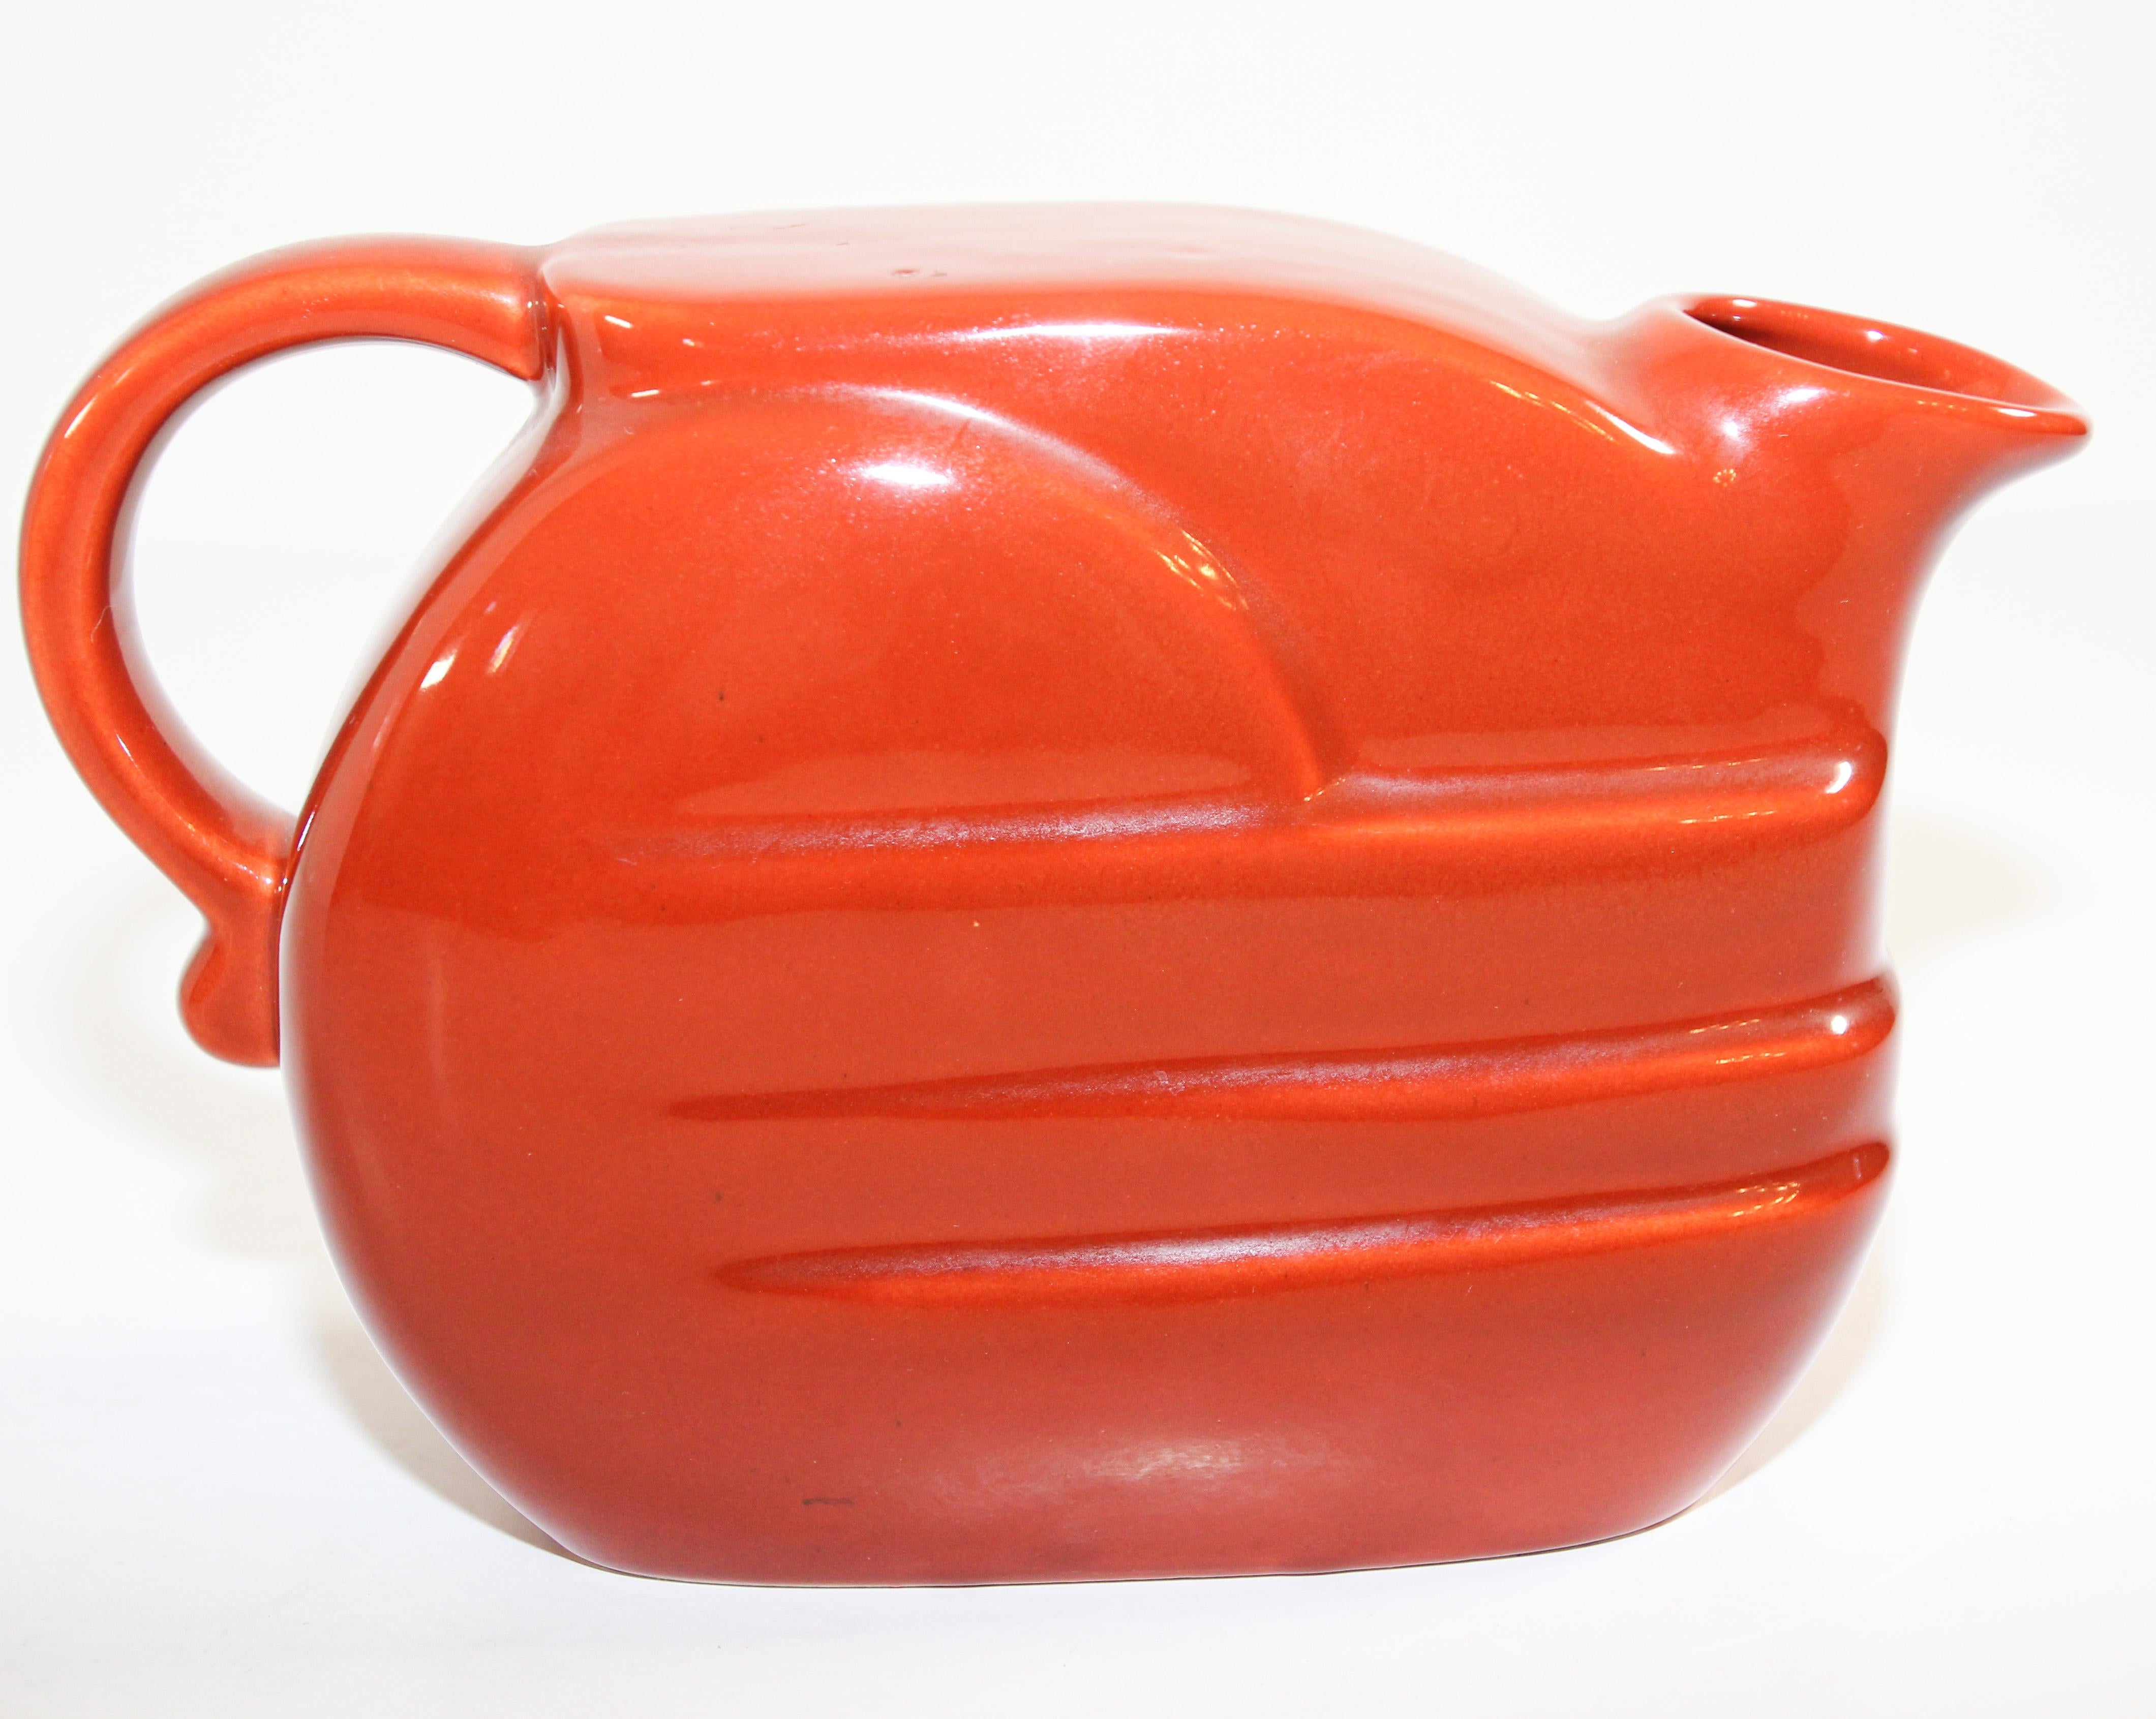 Midcentury vintage bright orange pitcher designed in the 1960s by Joseph Magnin.
Vivid Italian pottery glazed orange retro barware pitcher with handle in a modern stylized form.
The ceramic pitcher was handmade in Italy for the legendary Joseph